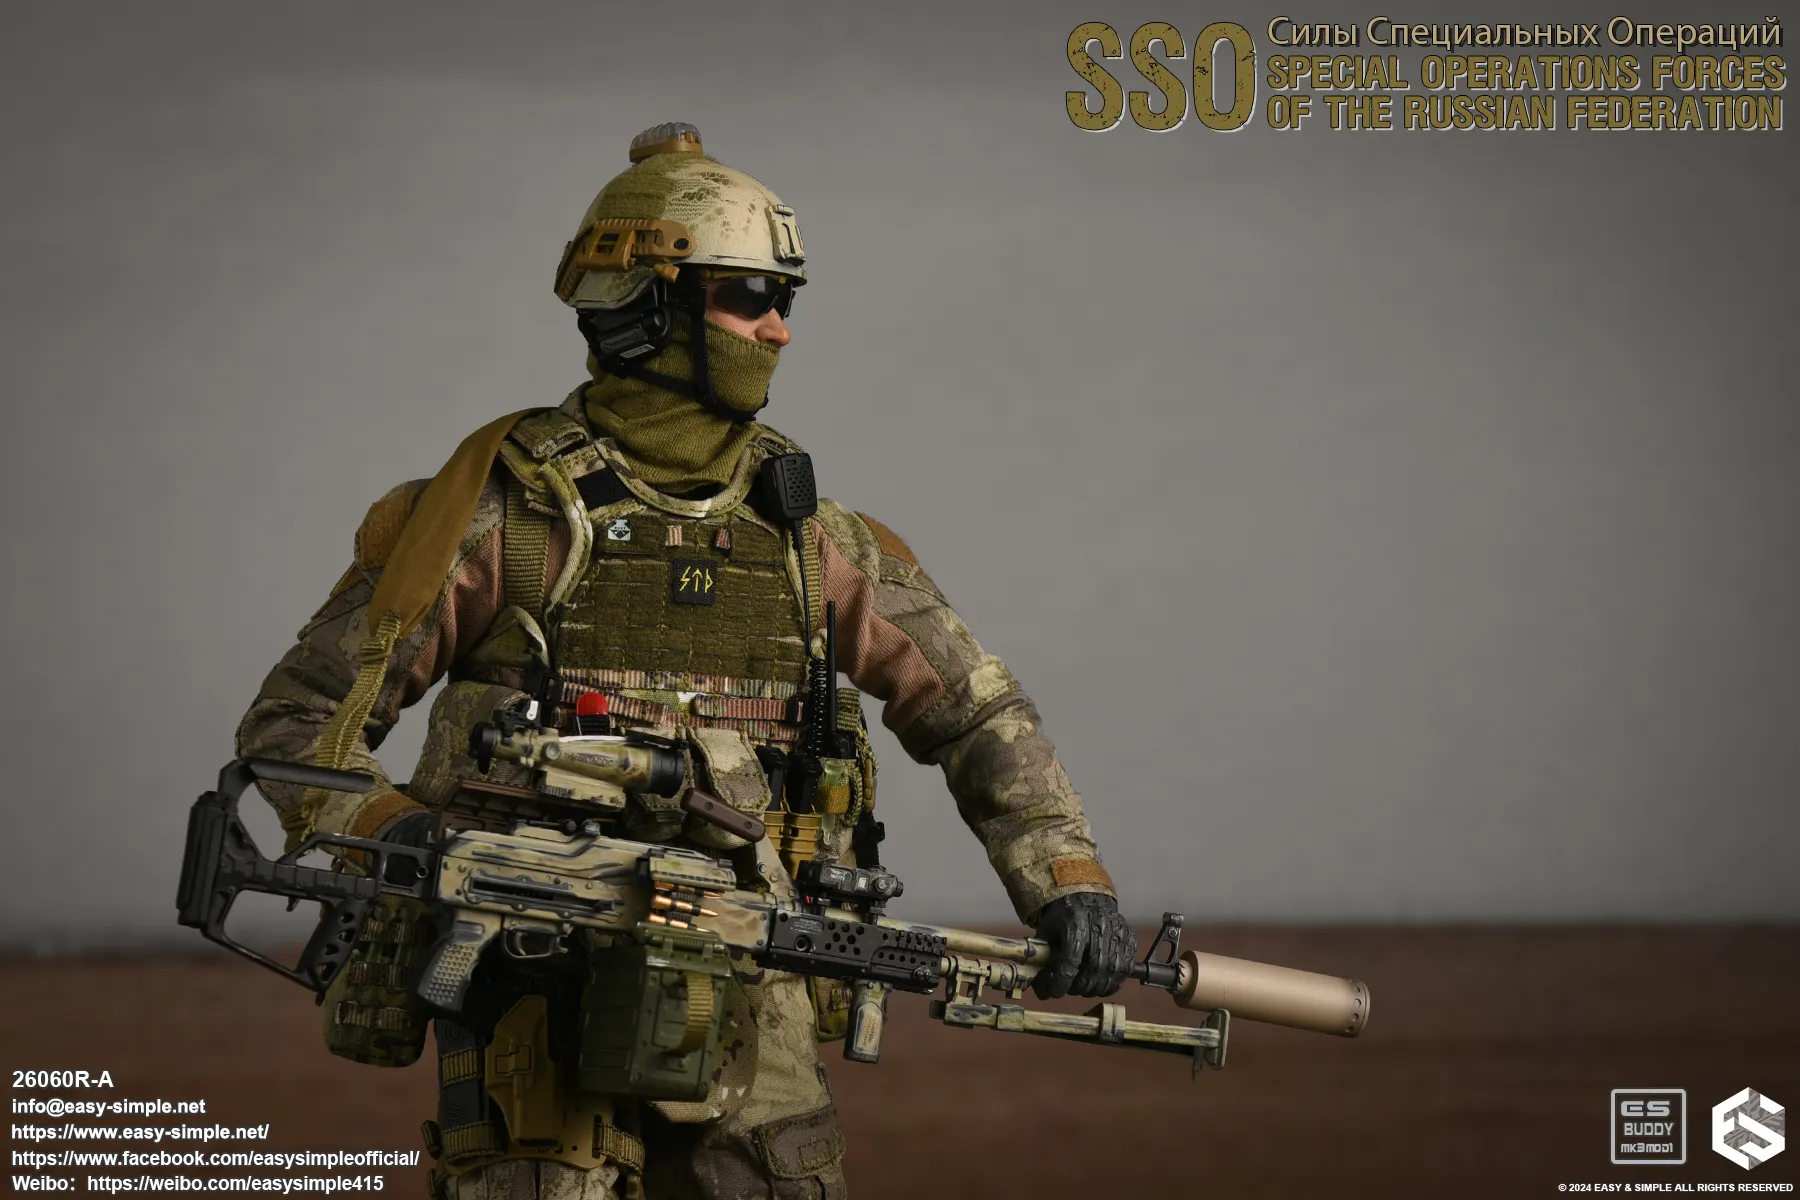 forces - NEW PRODUCT: Easy&Simple 26060R-A Russian Special Operations Forces (SSO) Format,webp